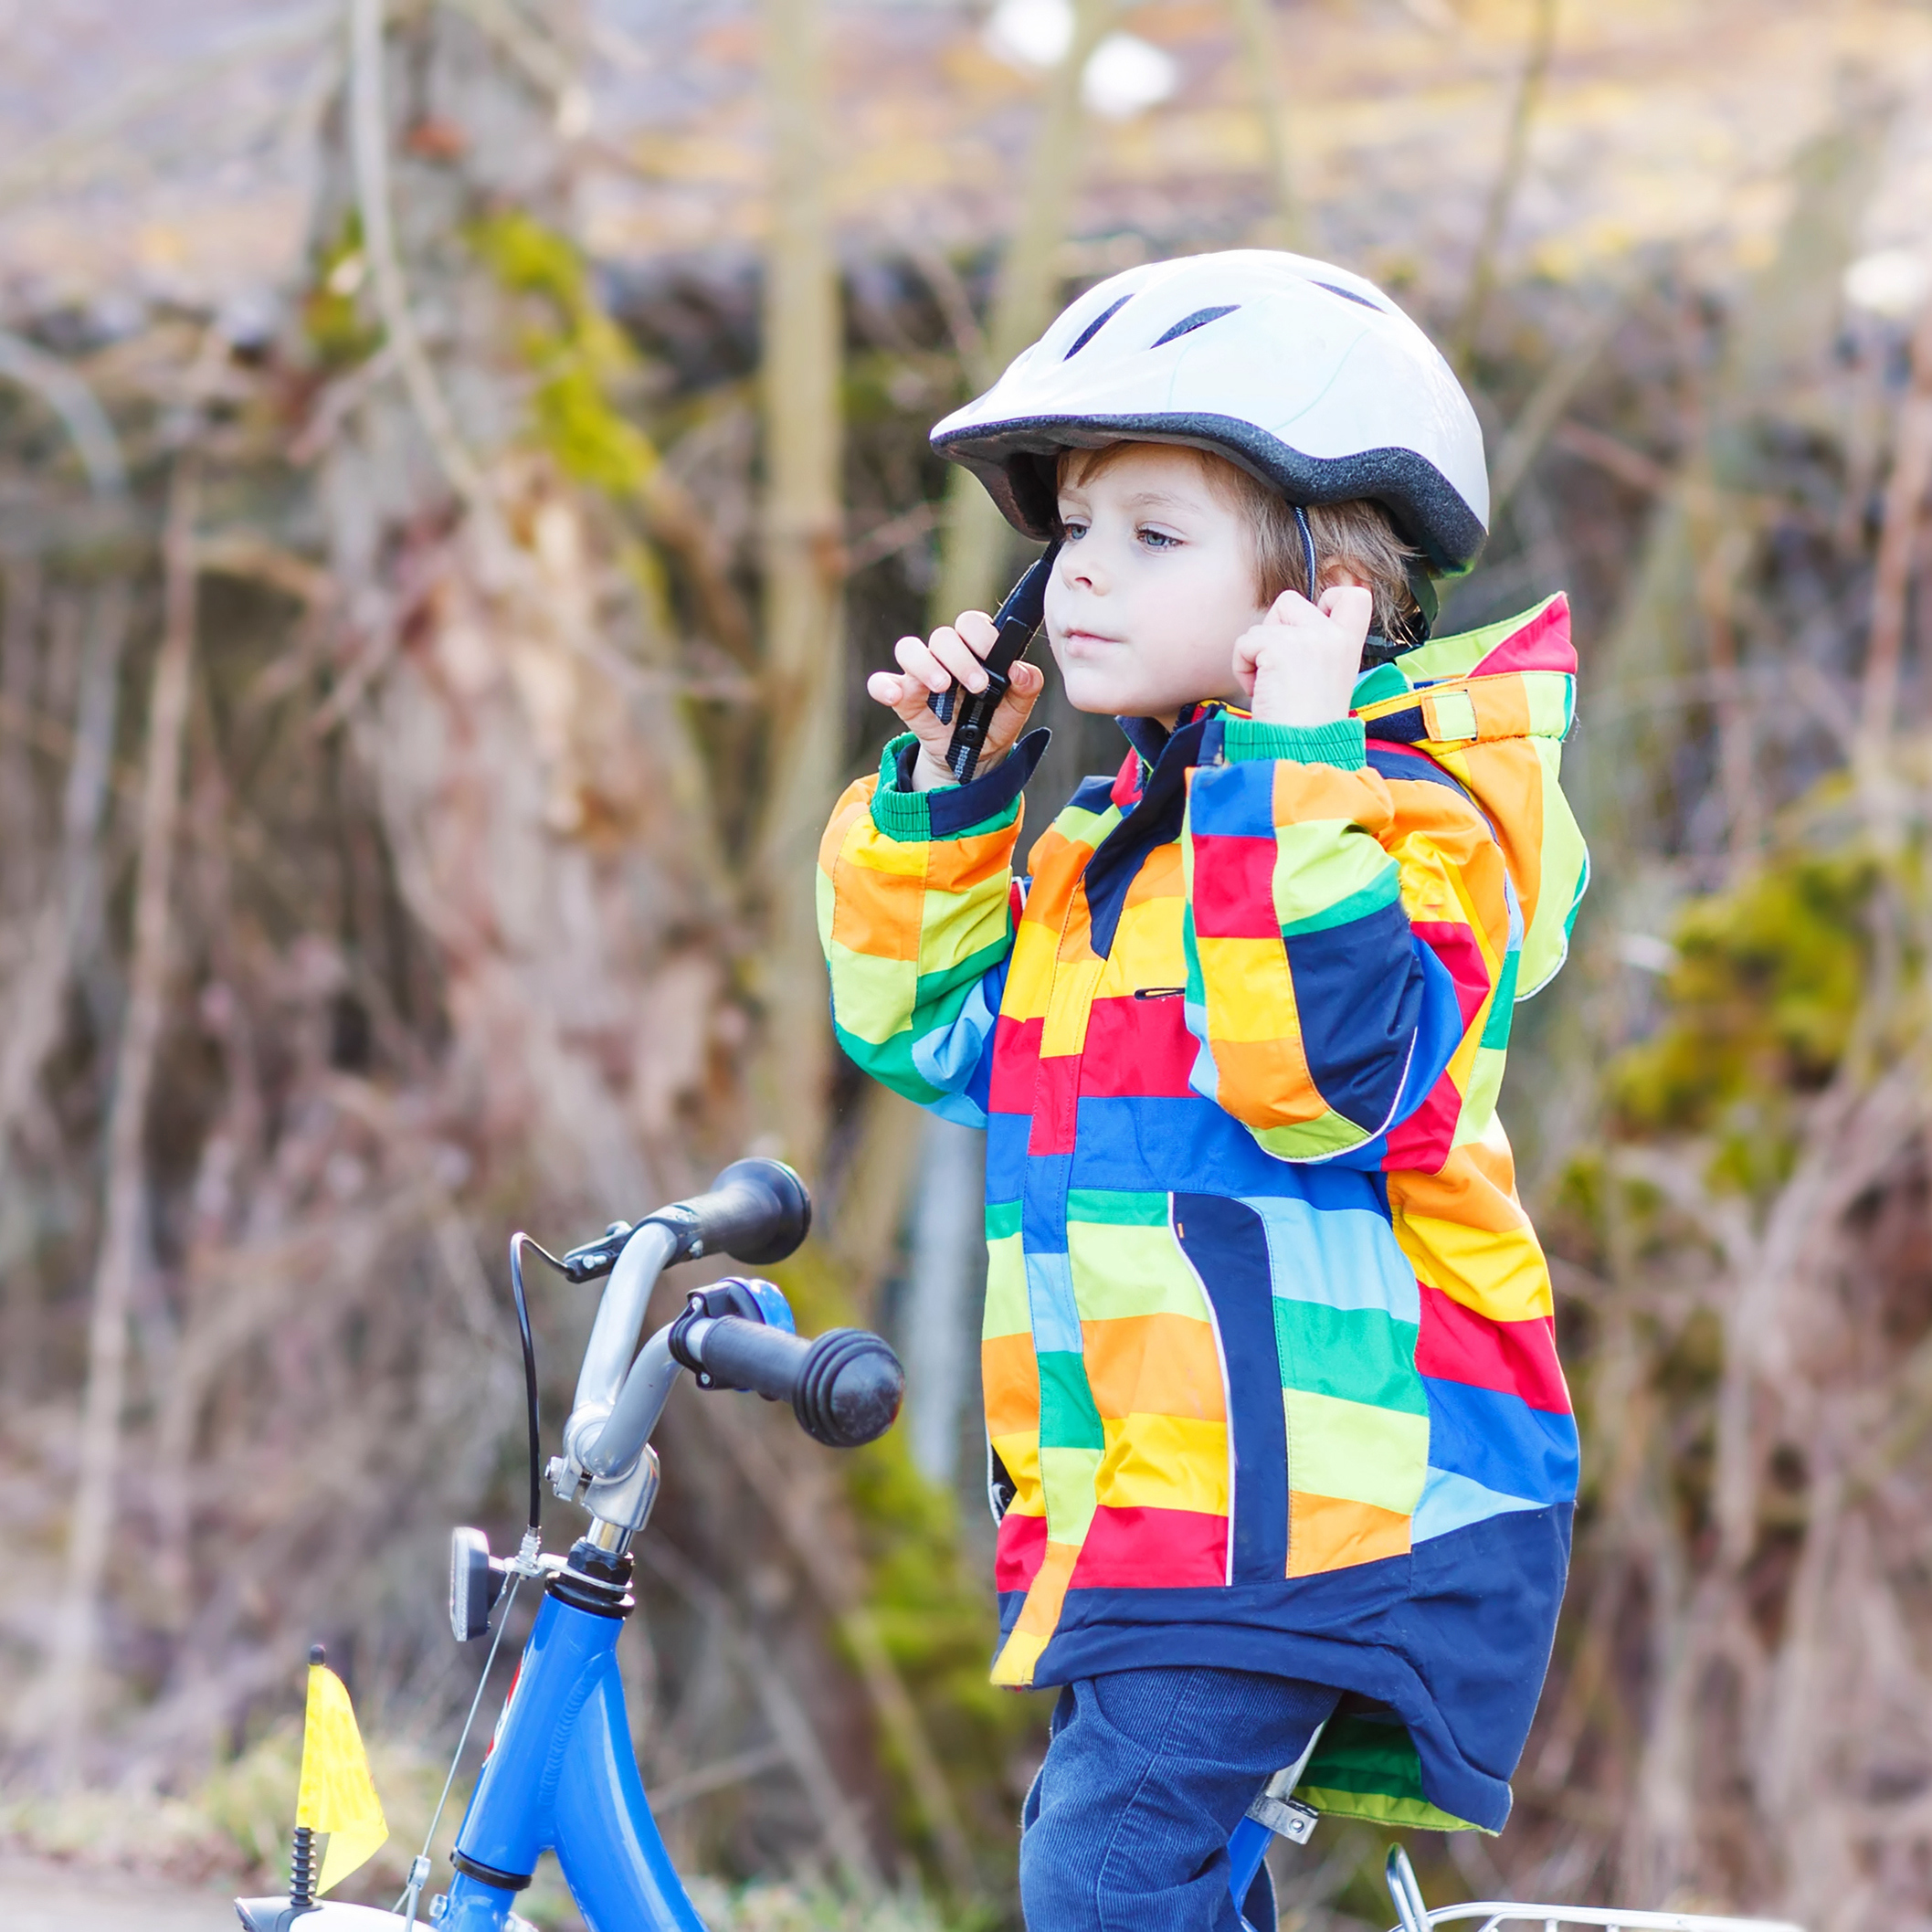 Bike-to-School Day and Helmet Safety Go Head to Head